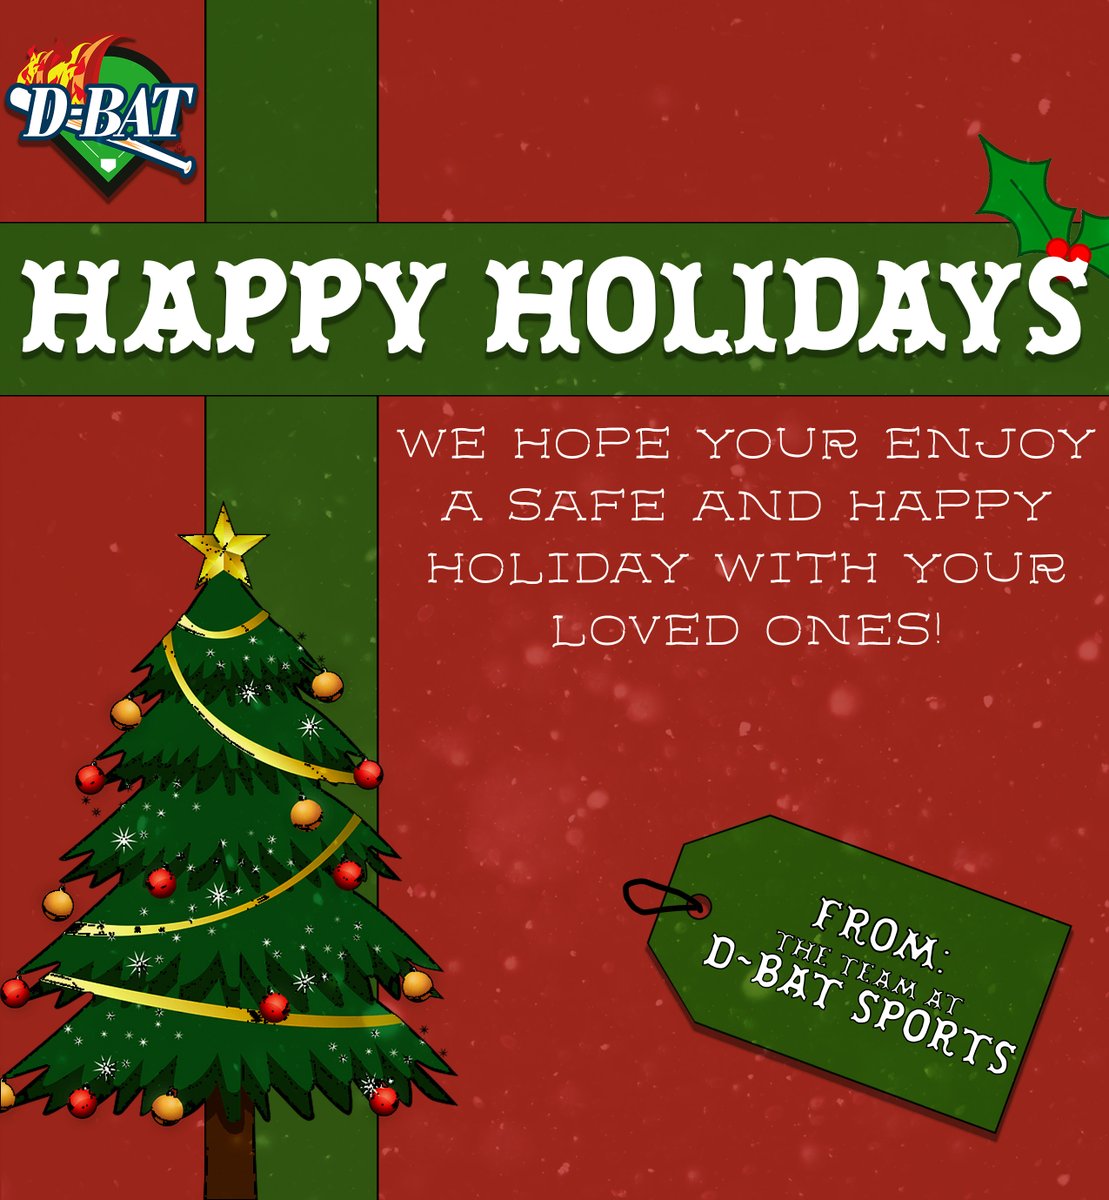 Happy Holidays from the team at D-BAT Sports!